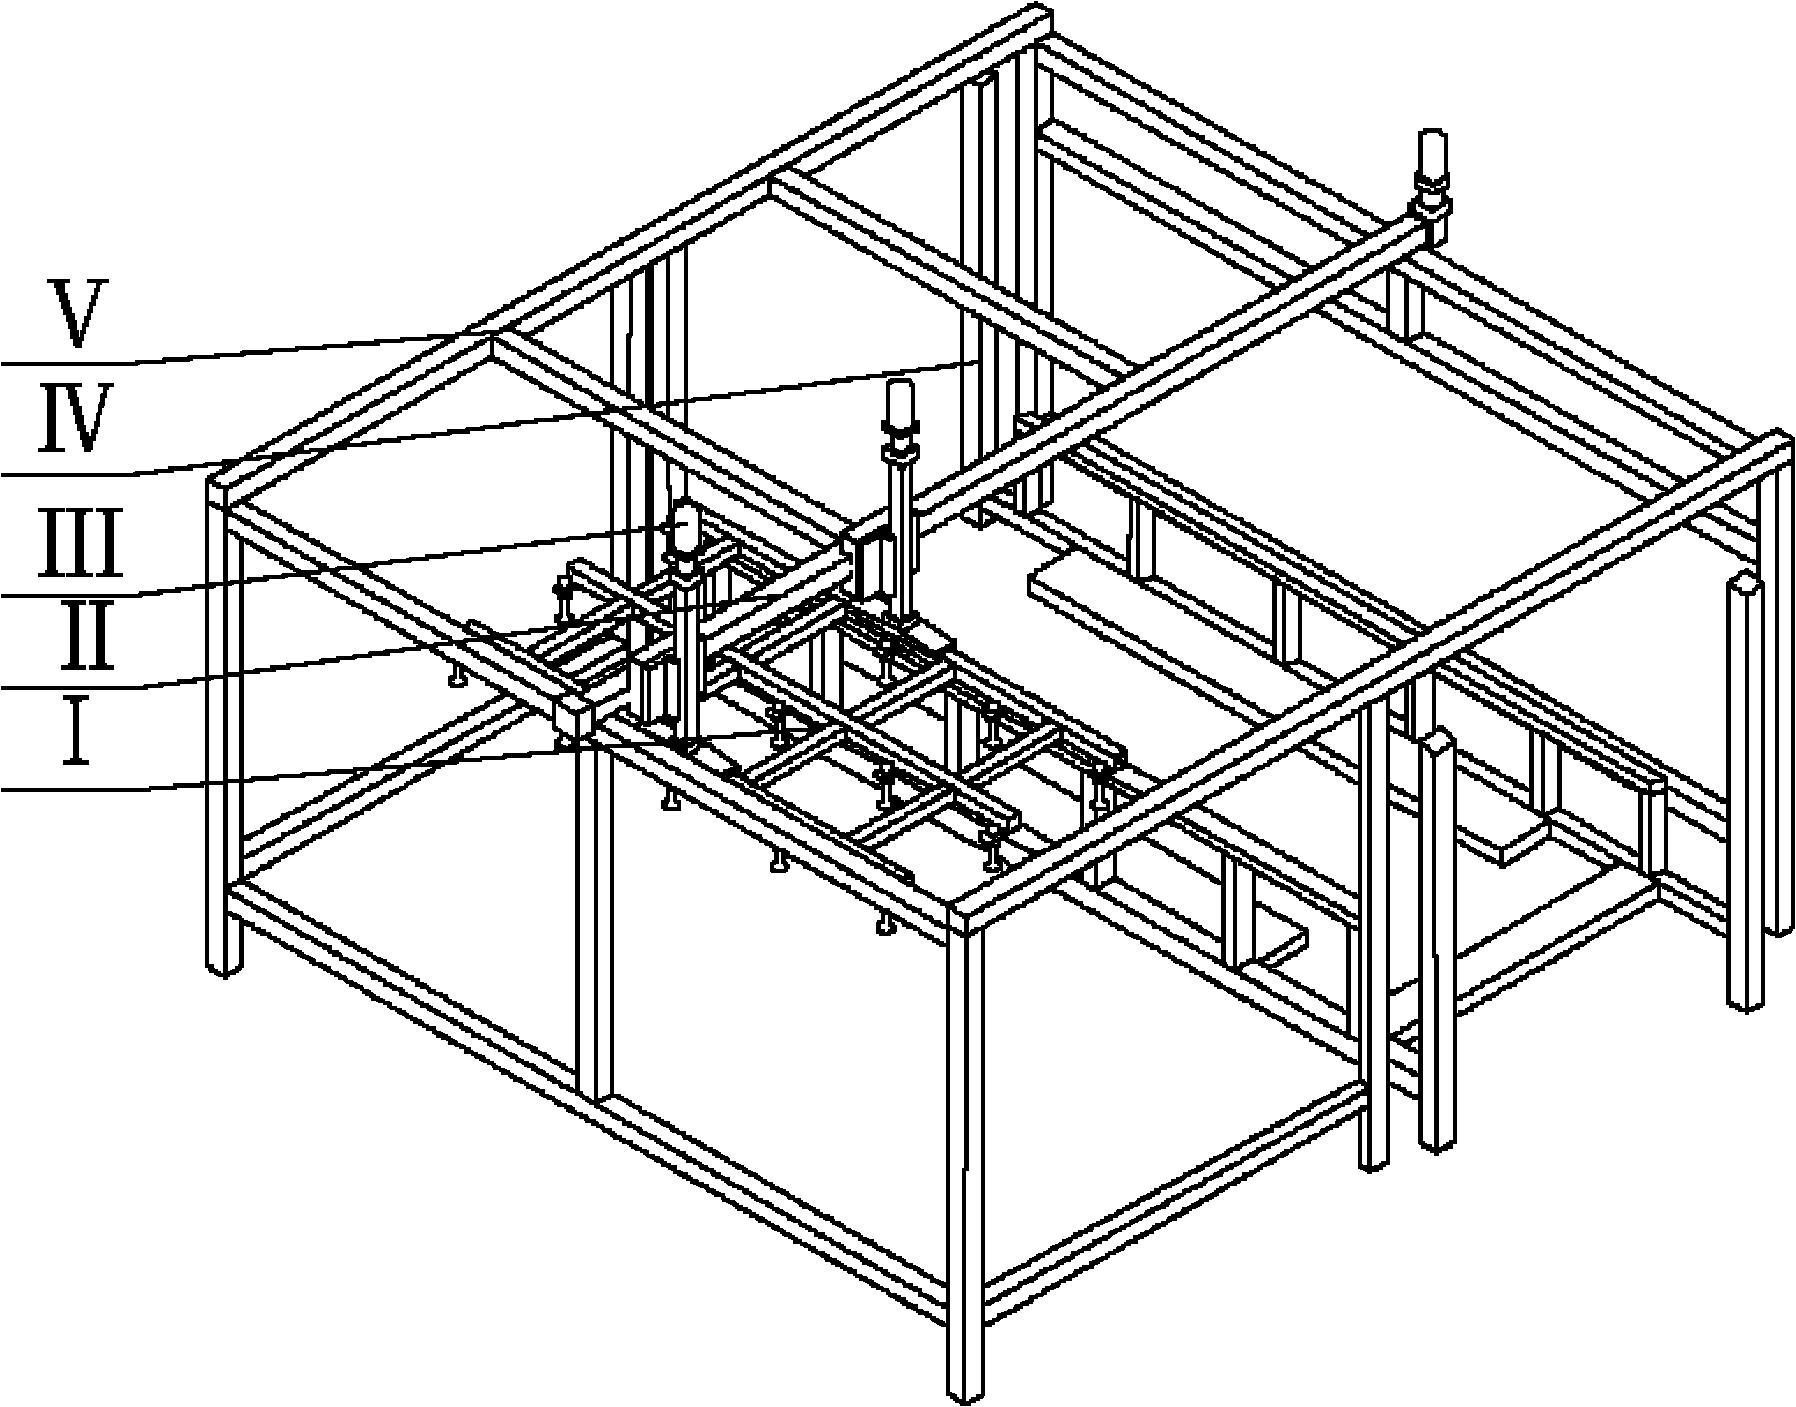 Loading and unloading handling mechanical arm for solar cell module